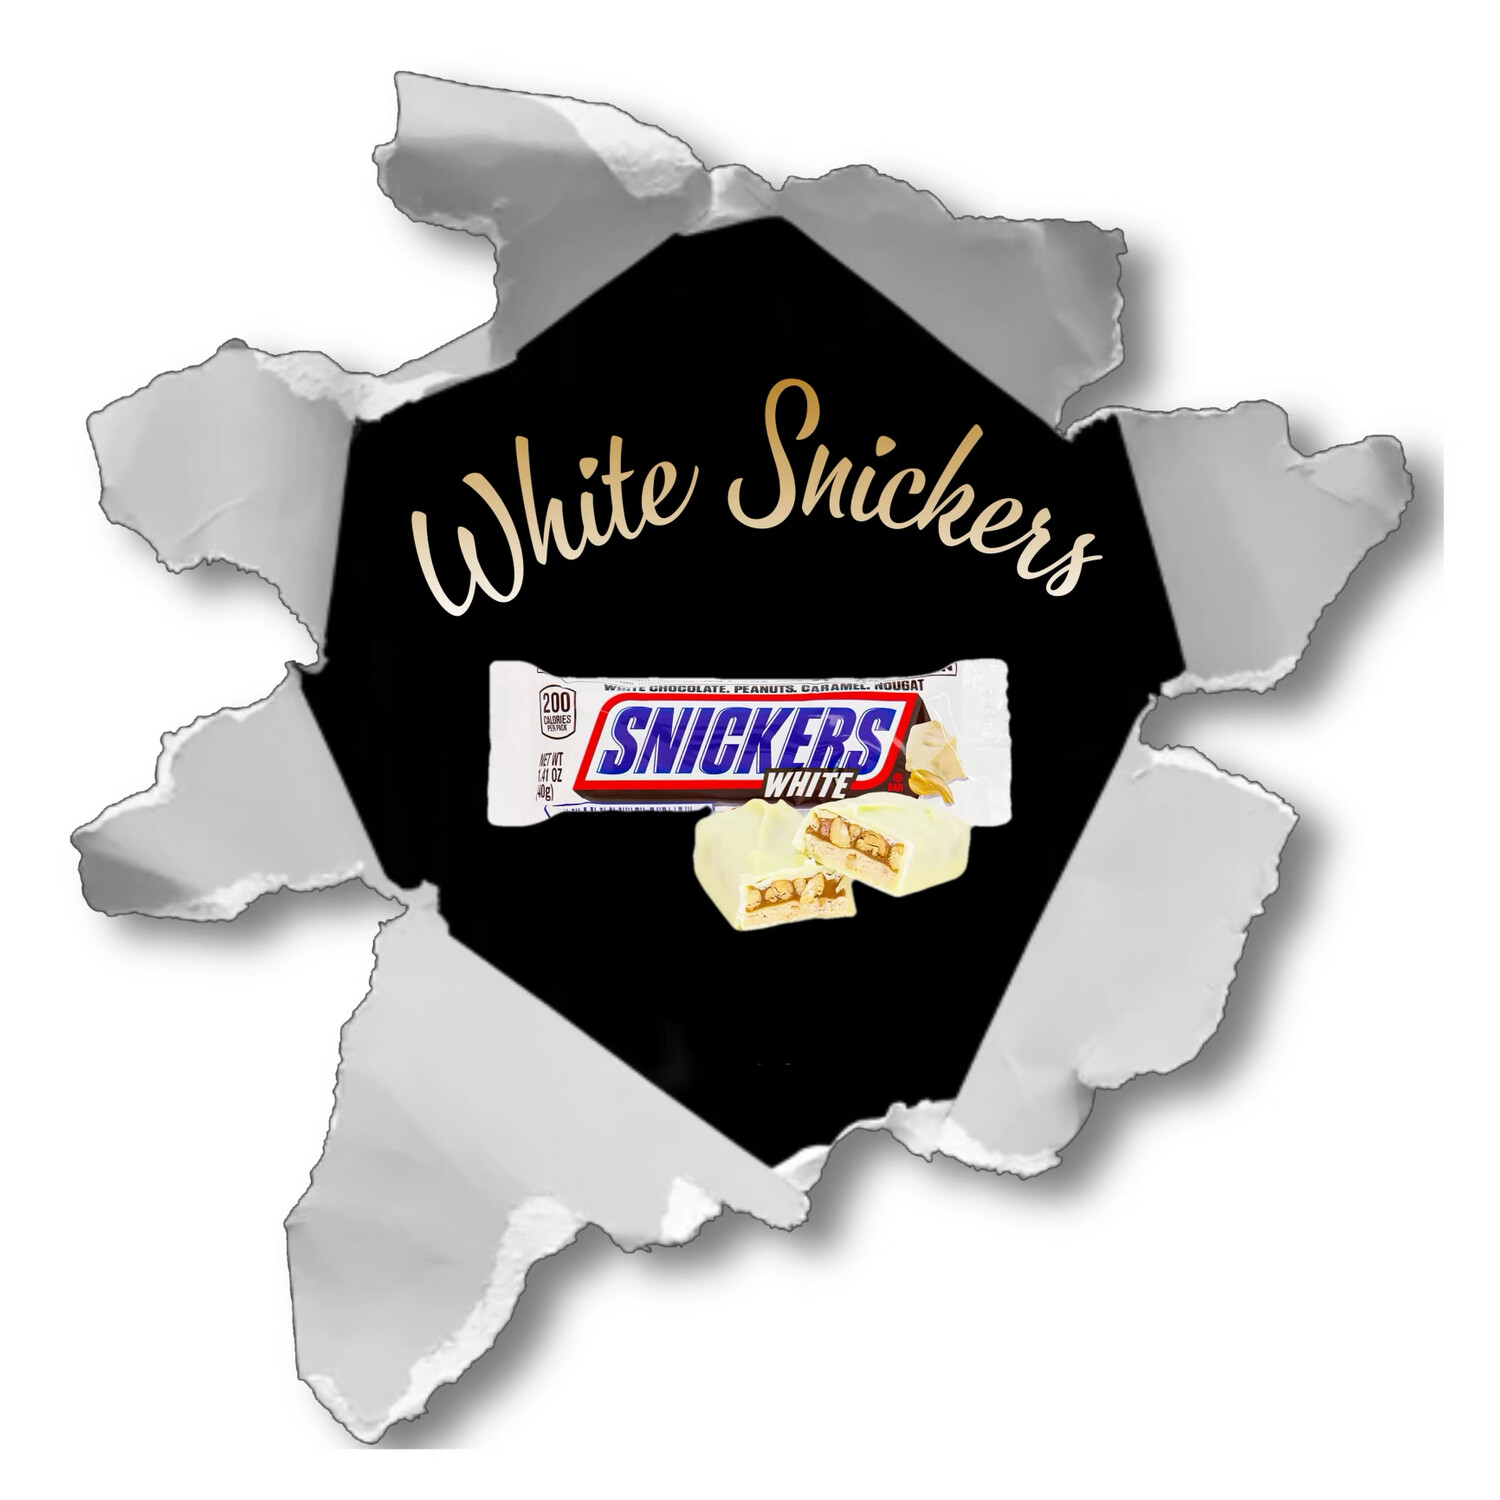 White Snickers Cheesecake Jar